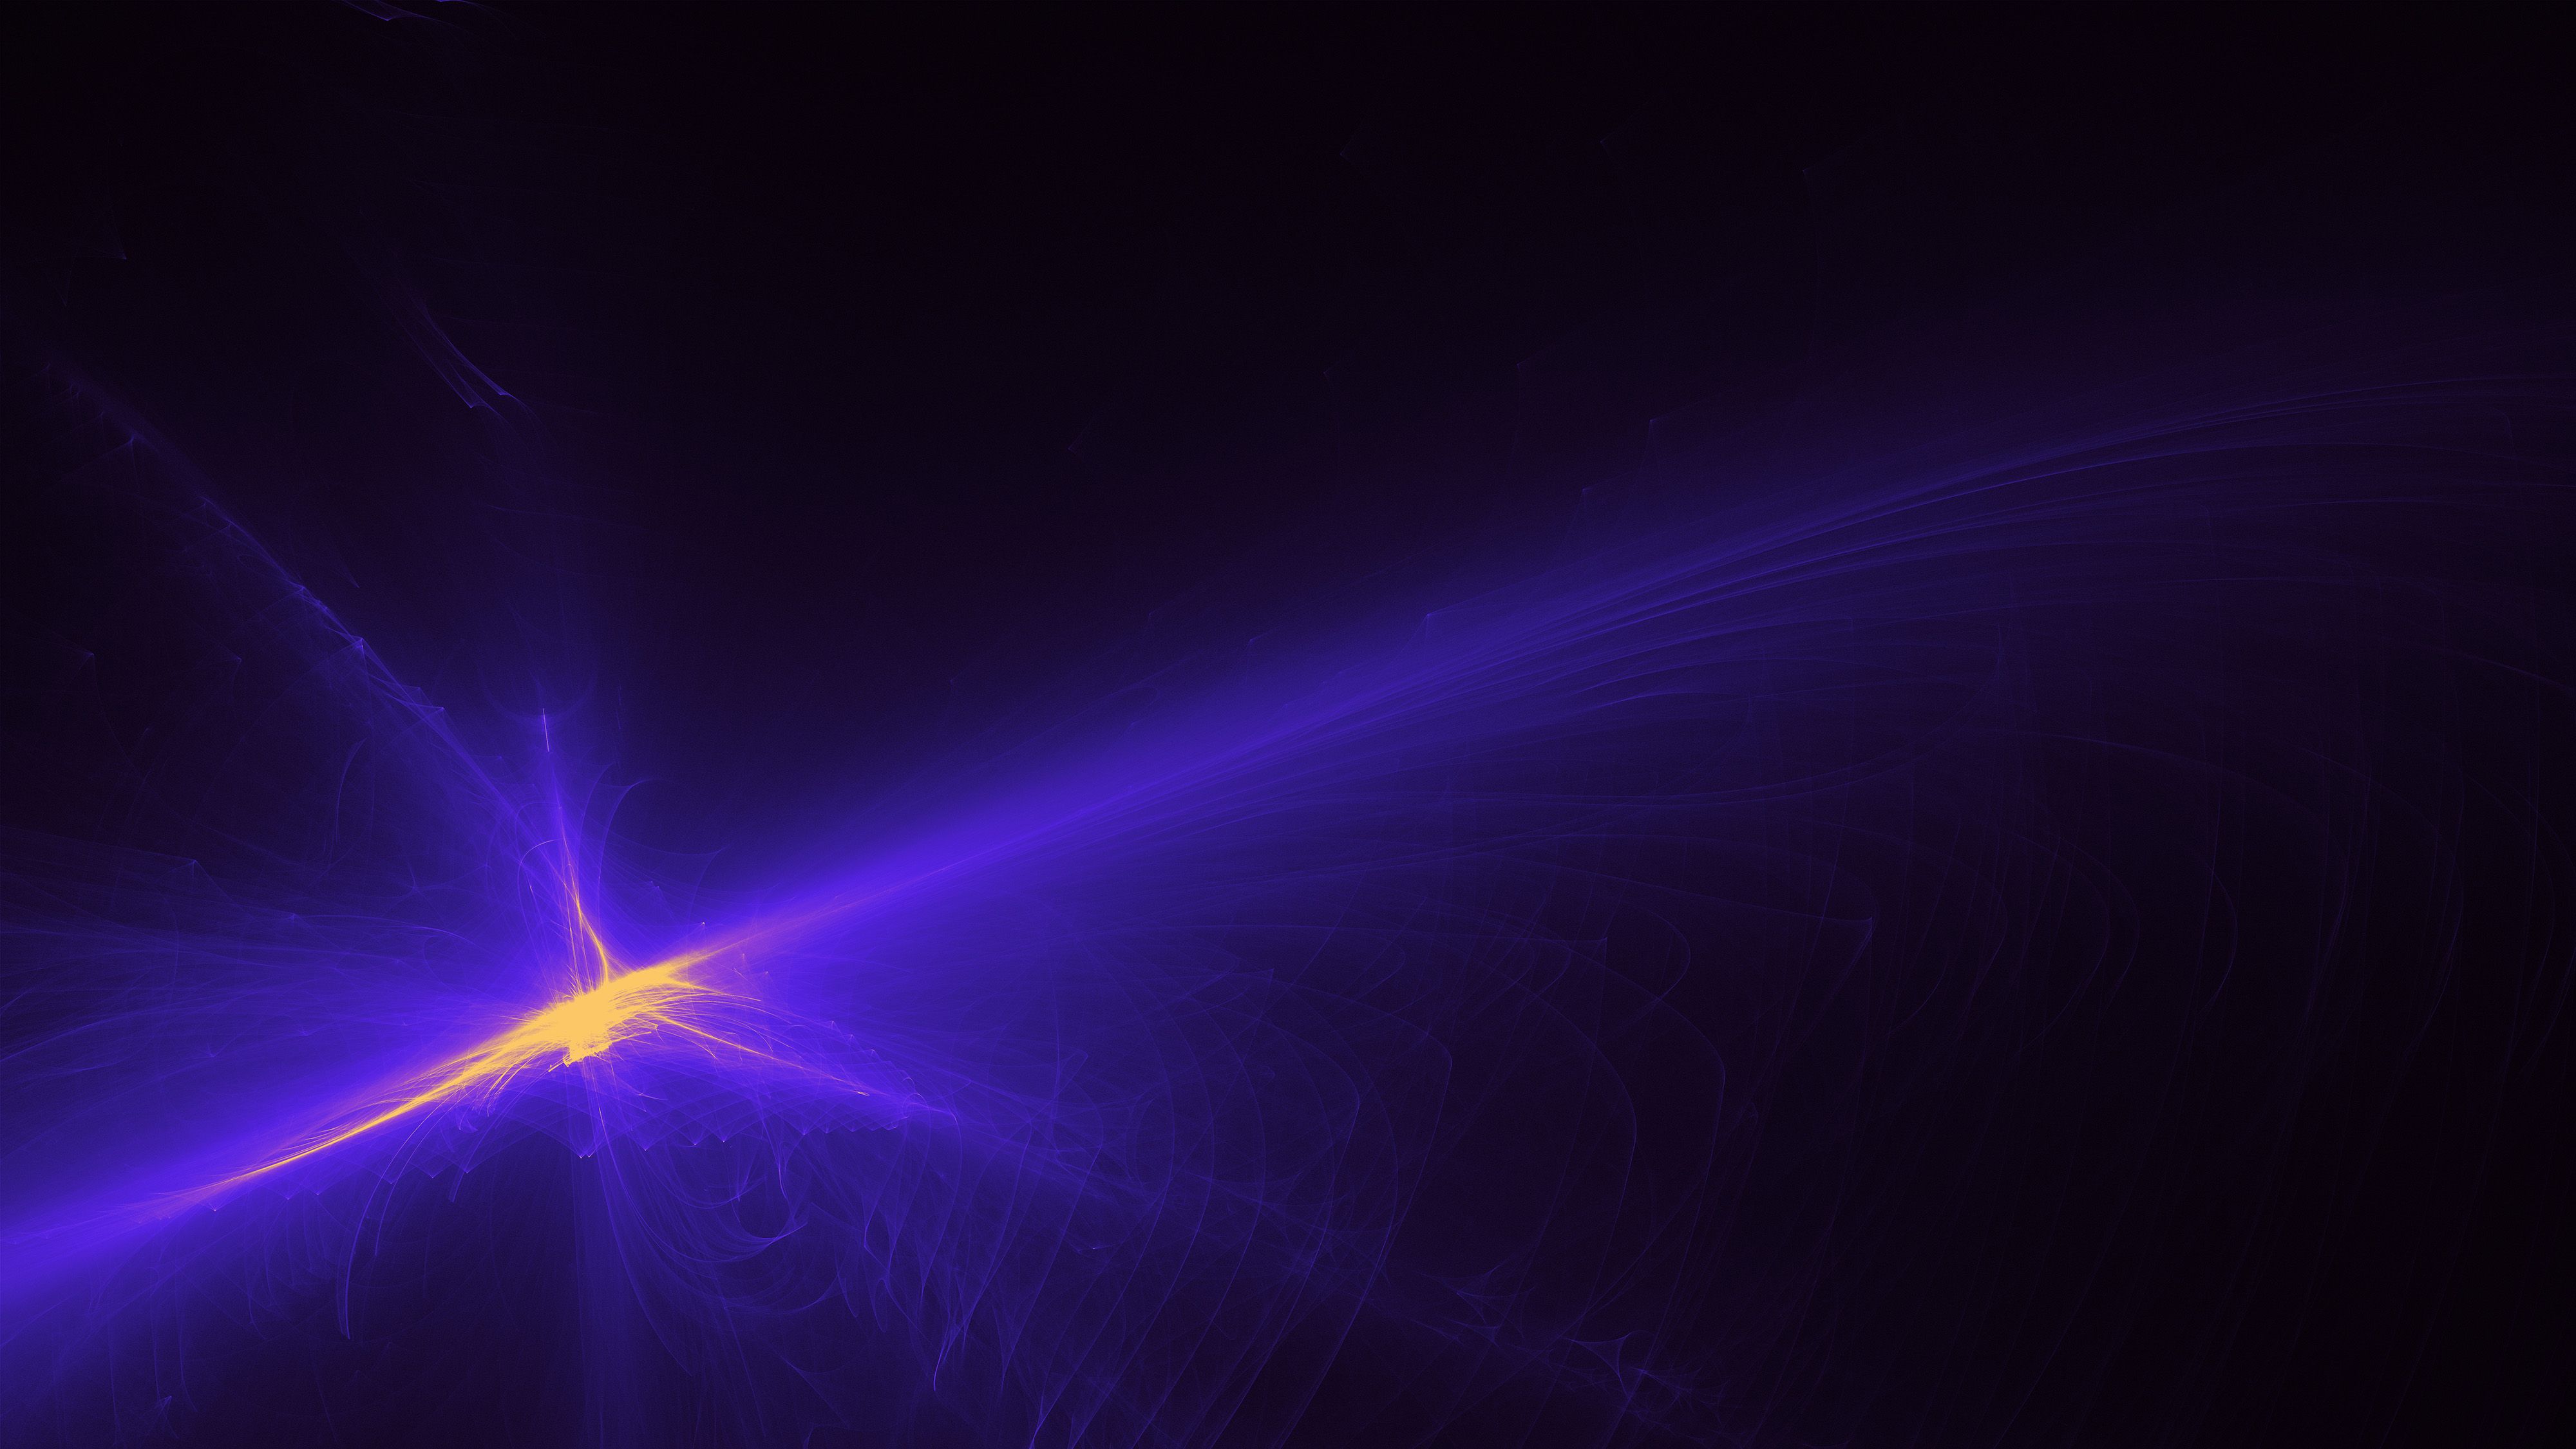 Download wallpaper 4000x2250 fractal, abstraction, rays, purple HD background